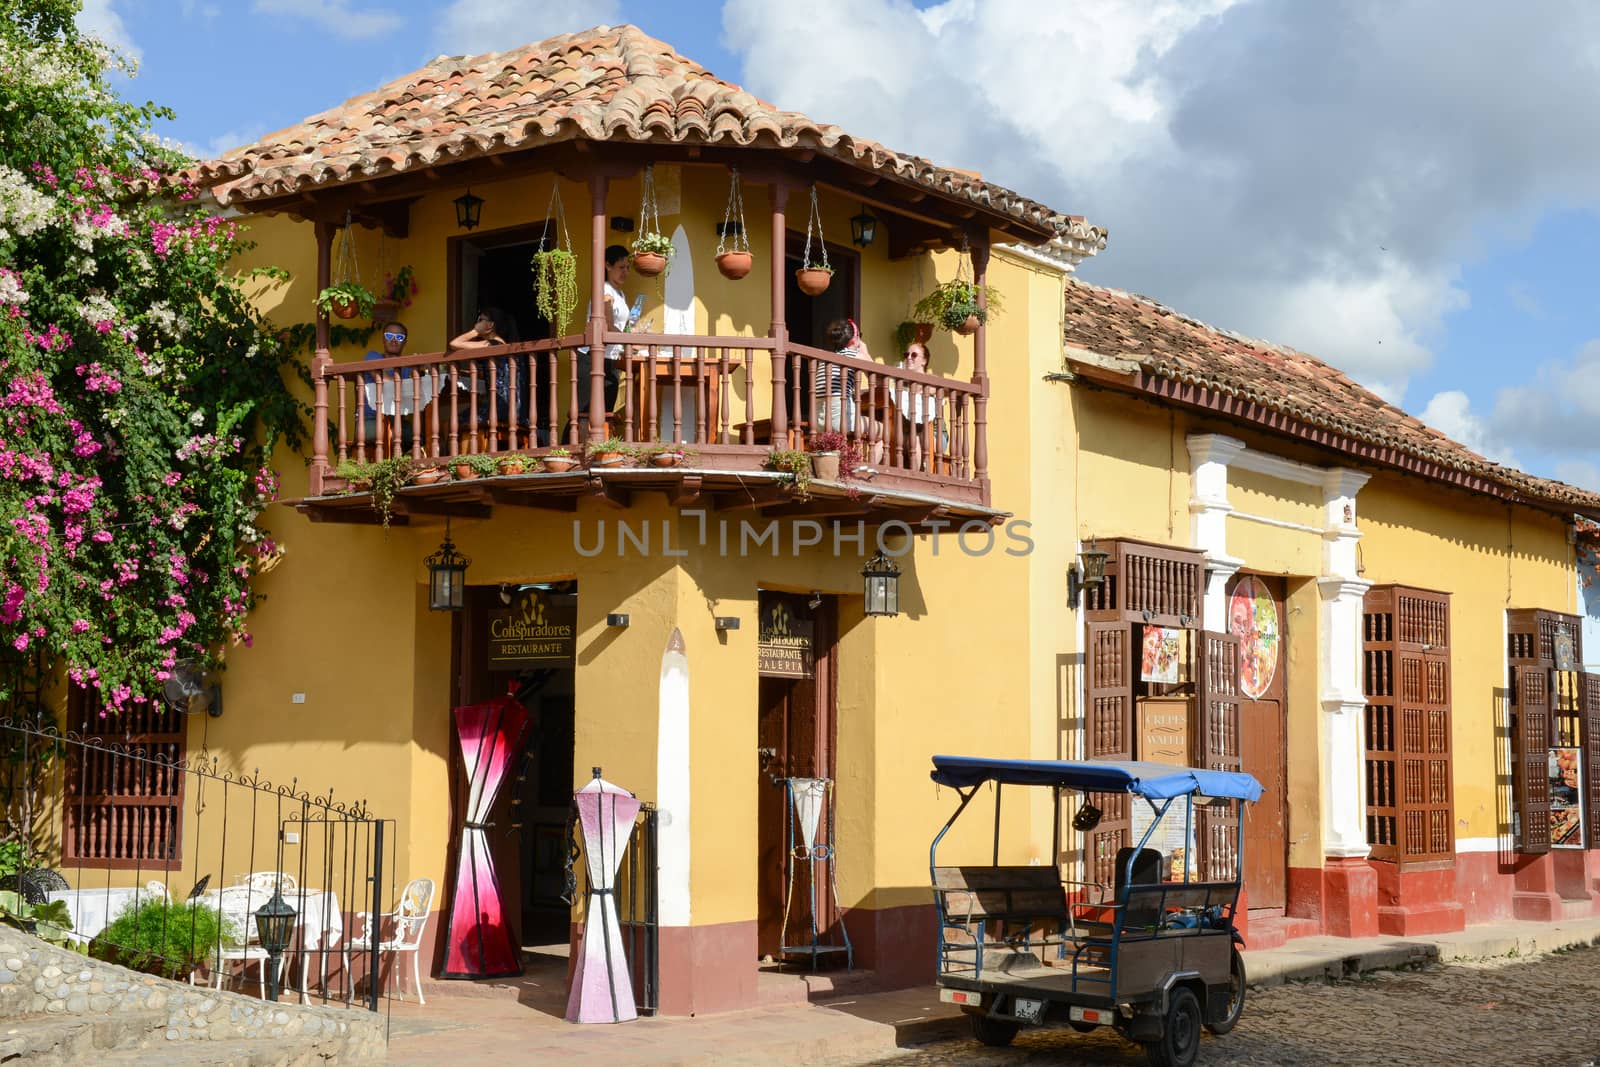 Trinidad, Cuba - 9 january 2016: people drinking and eating on the balcony of a restaurant in the colonial town of Trinidad in Cuba